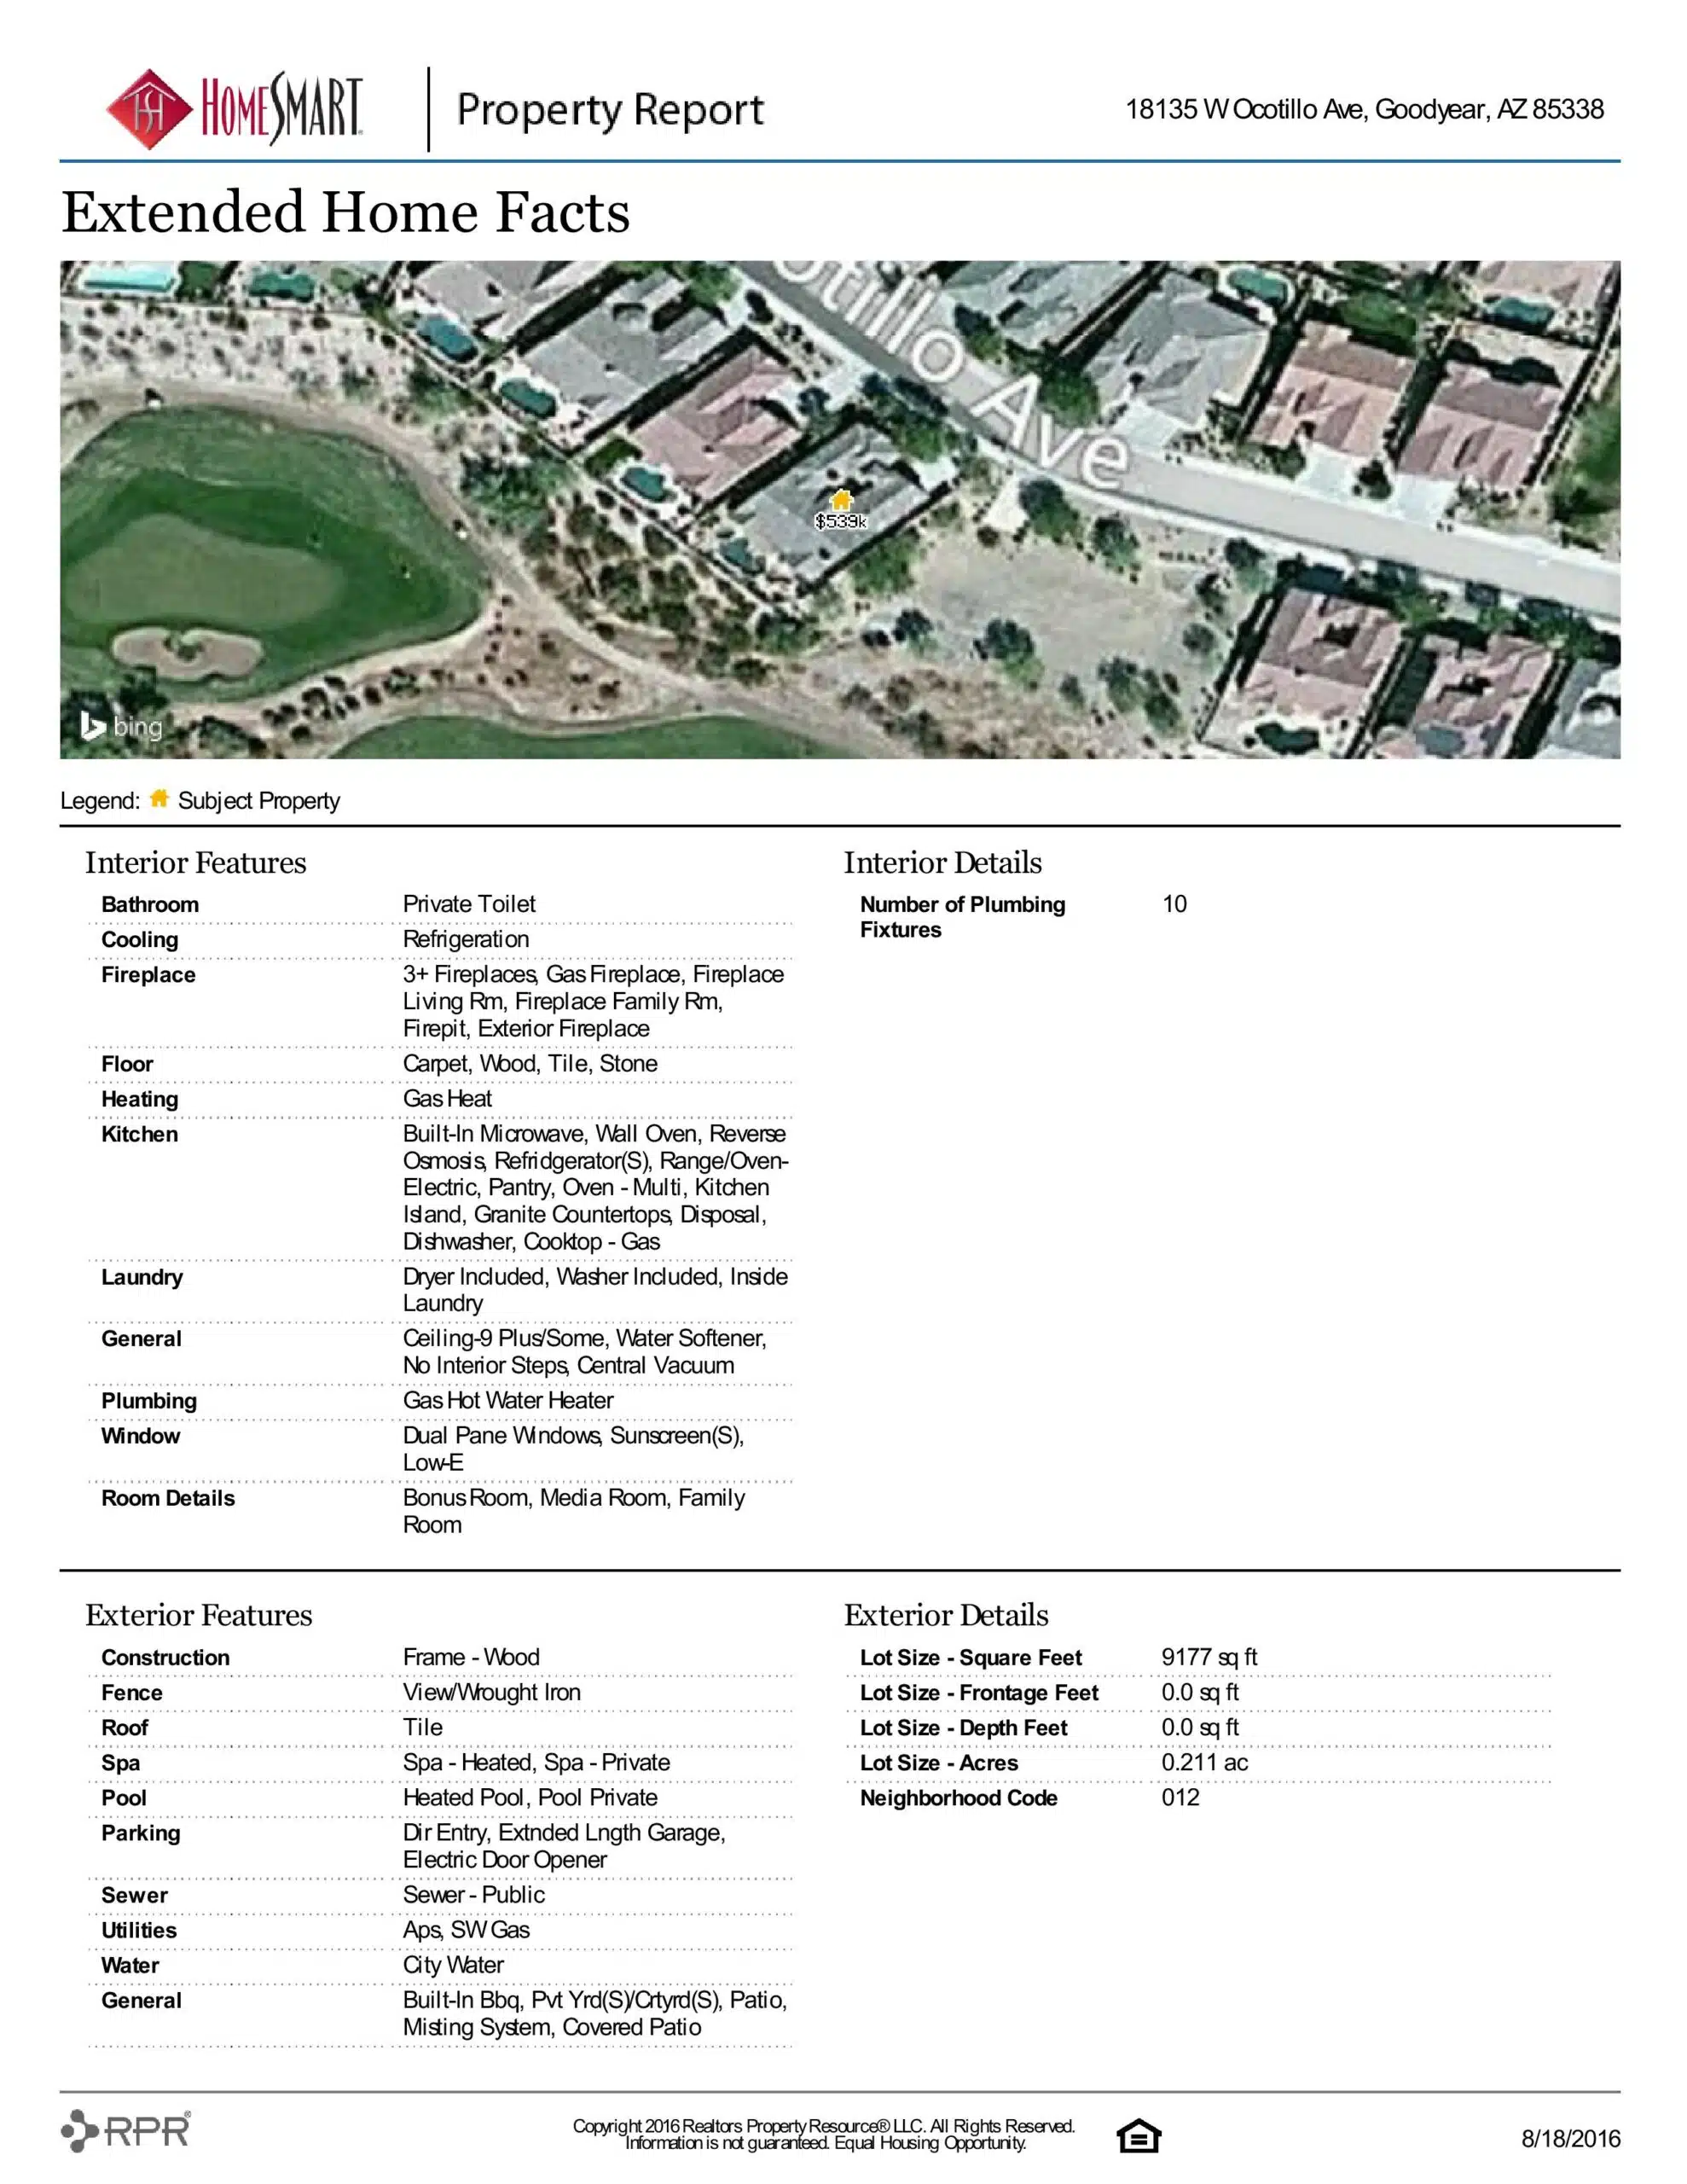 Property-Report_18135-W-Ocotillo-Ave-Goodyear-AZ-85338_2016-08-18-09-56-21-page-004